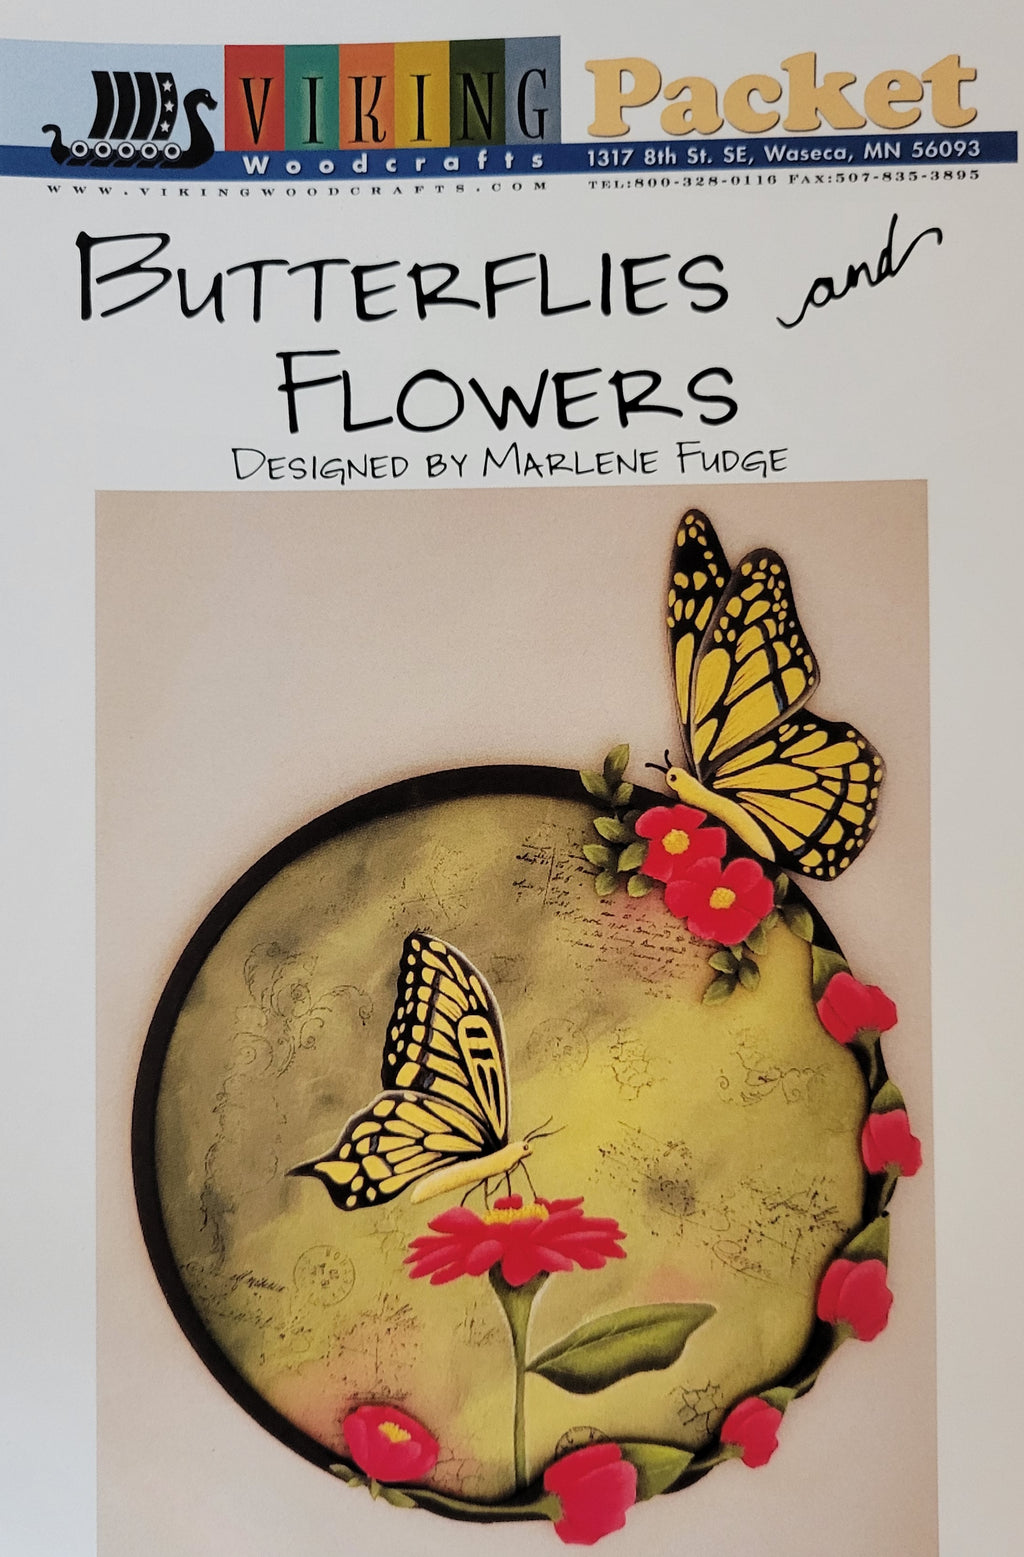 Butterflies and Flowers packet Designed by Marlene Fudge